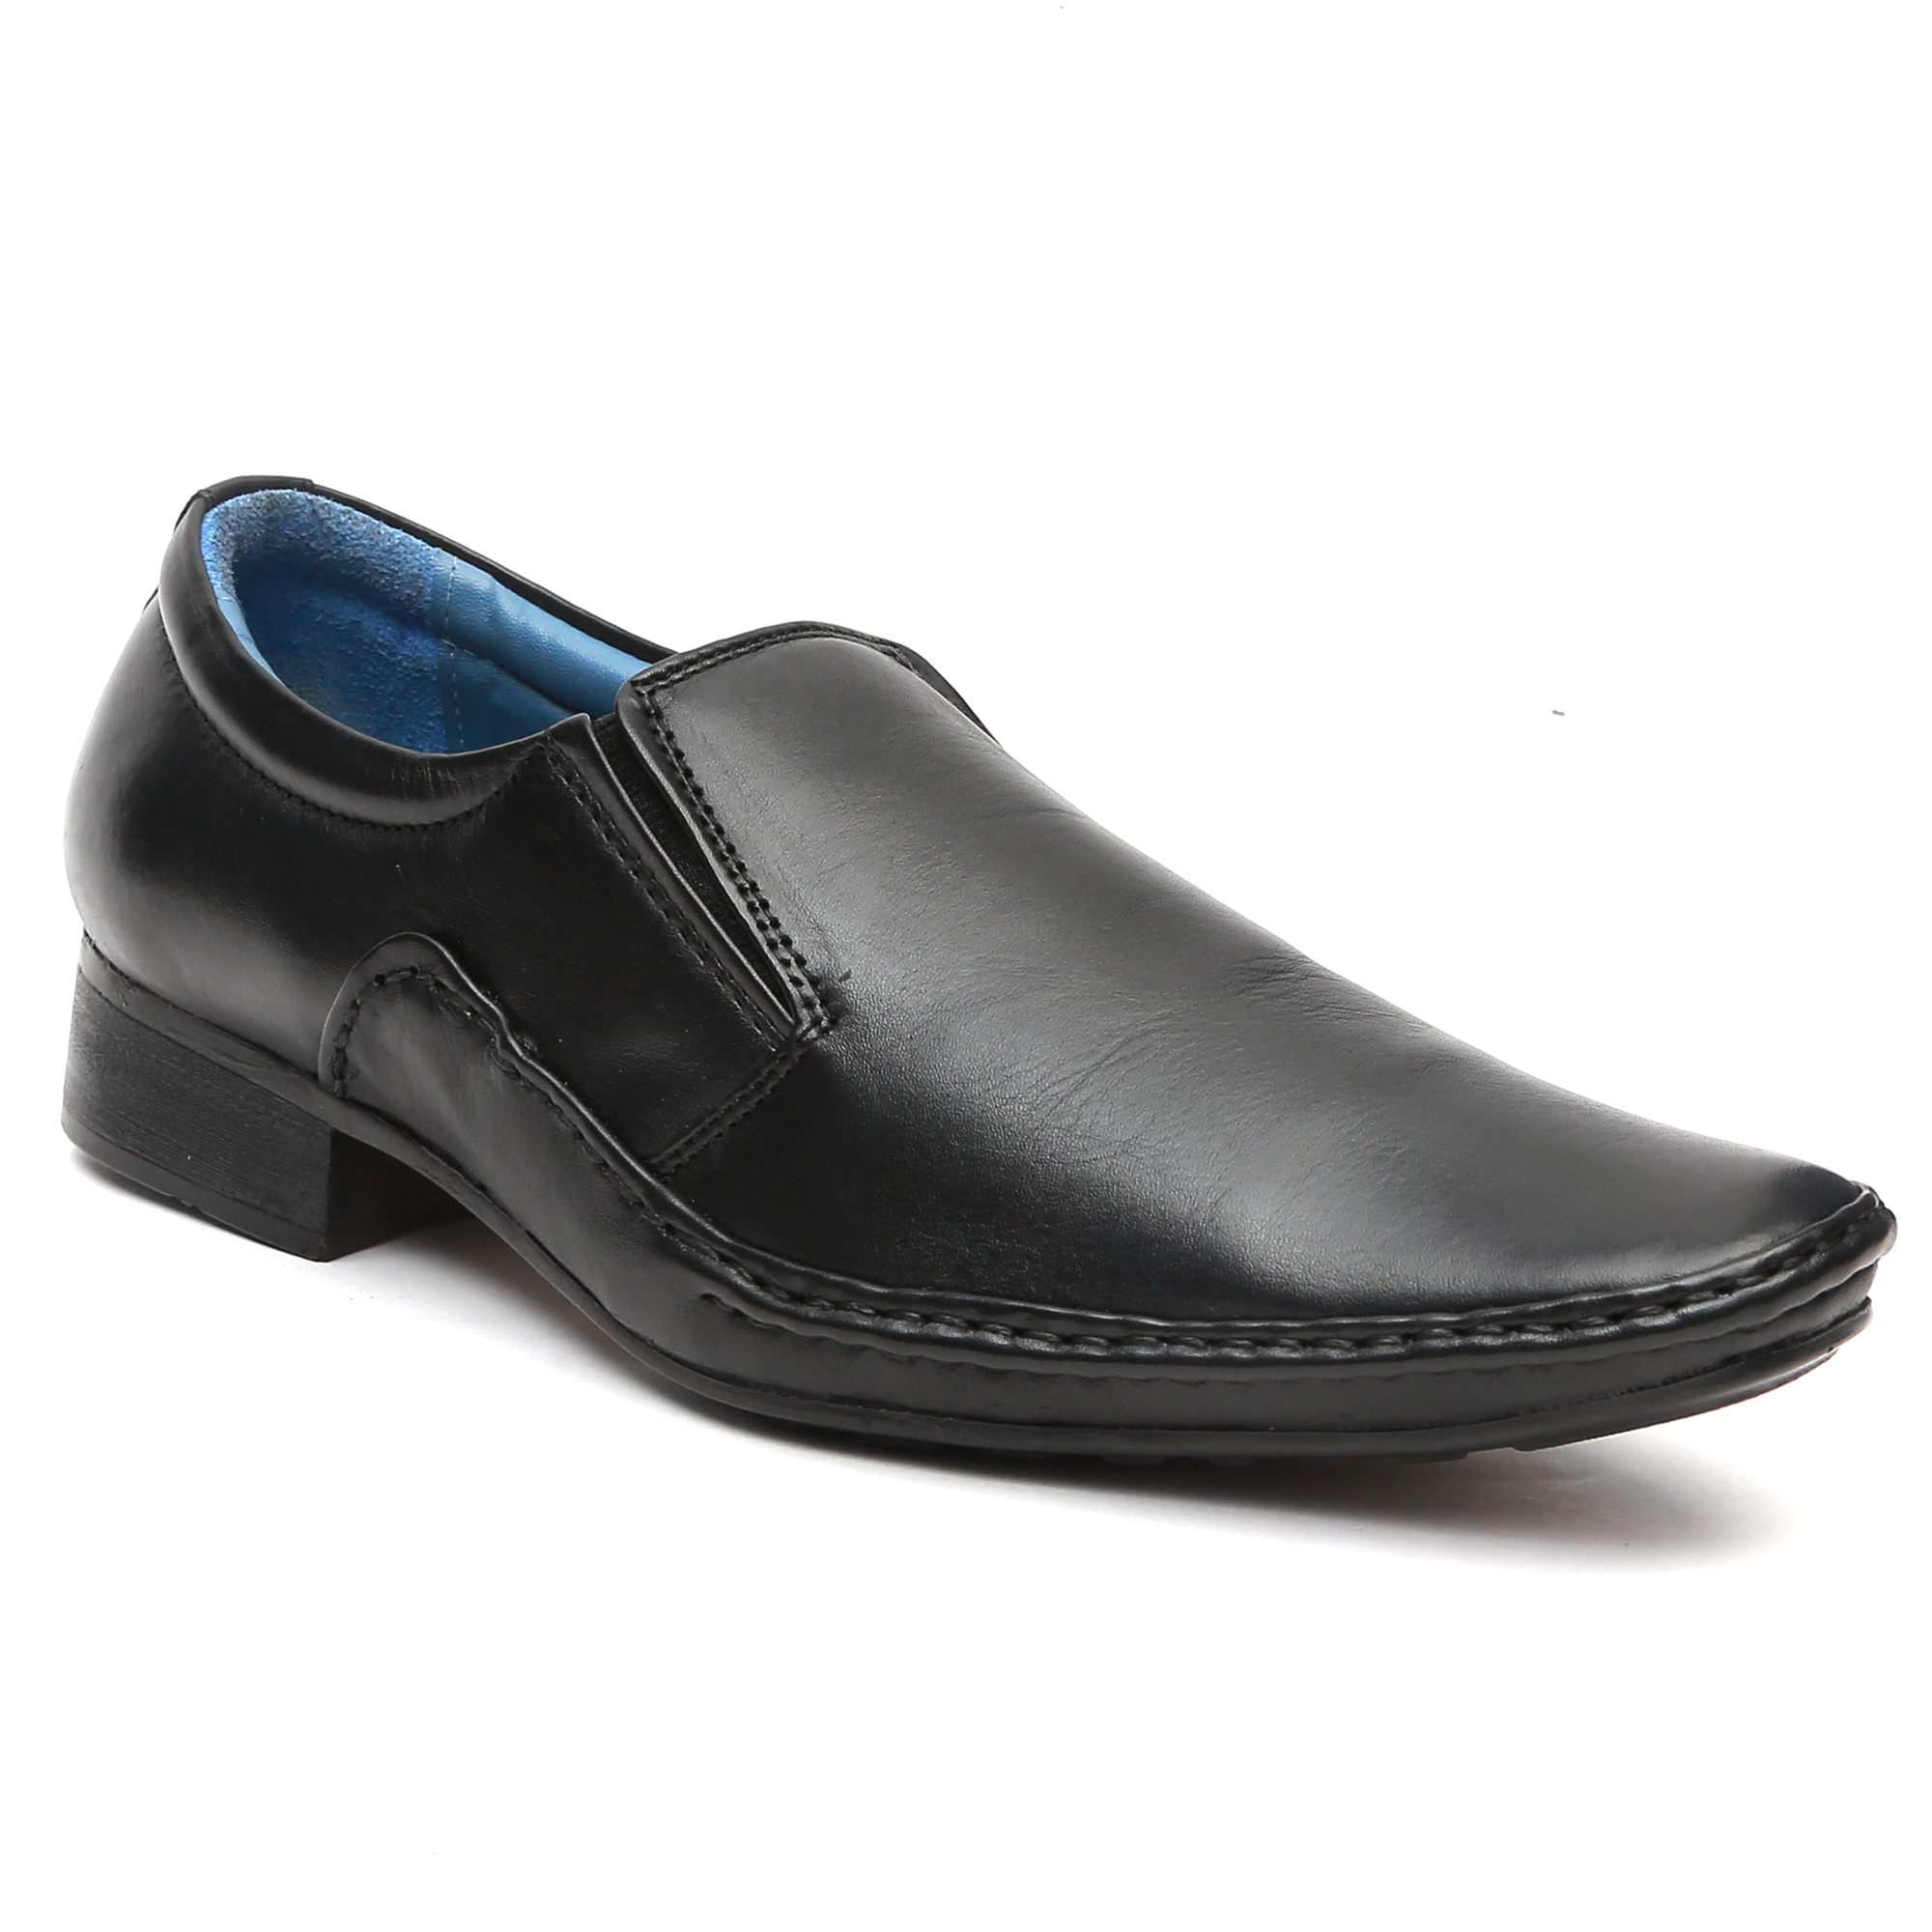 Buy TANNY SHOES GENUINE LEATHER MEN'S FORMAL SHOES Online @ ₹1899 from ...